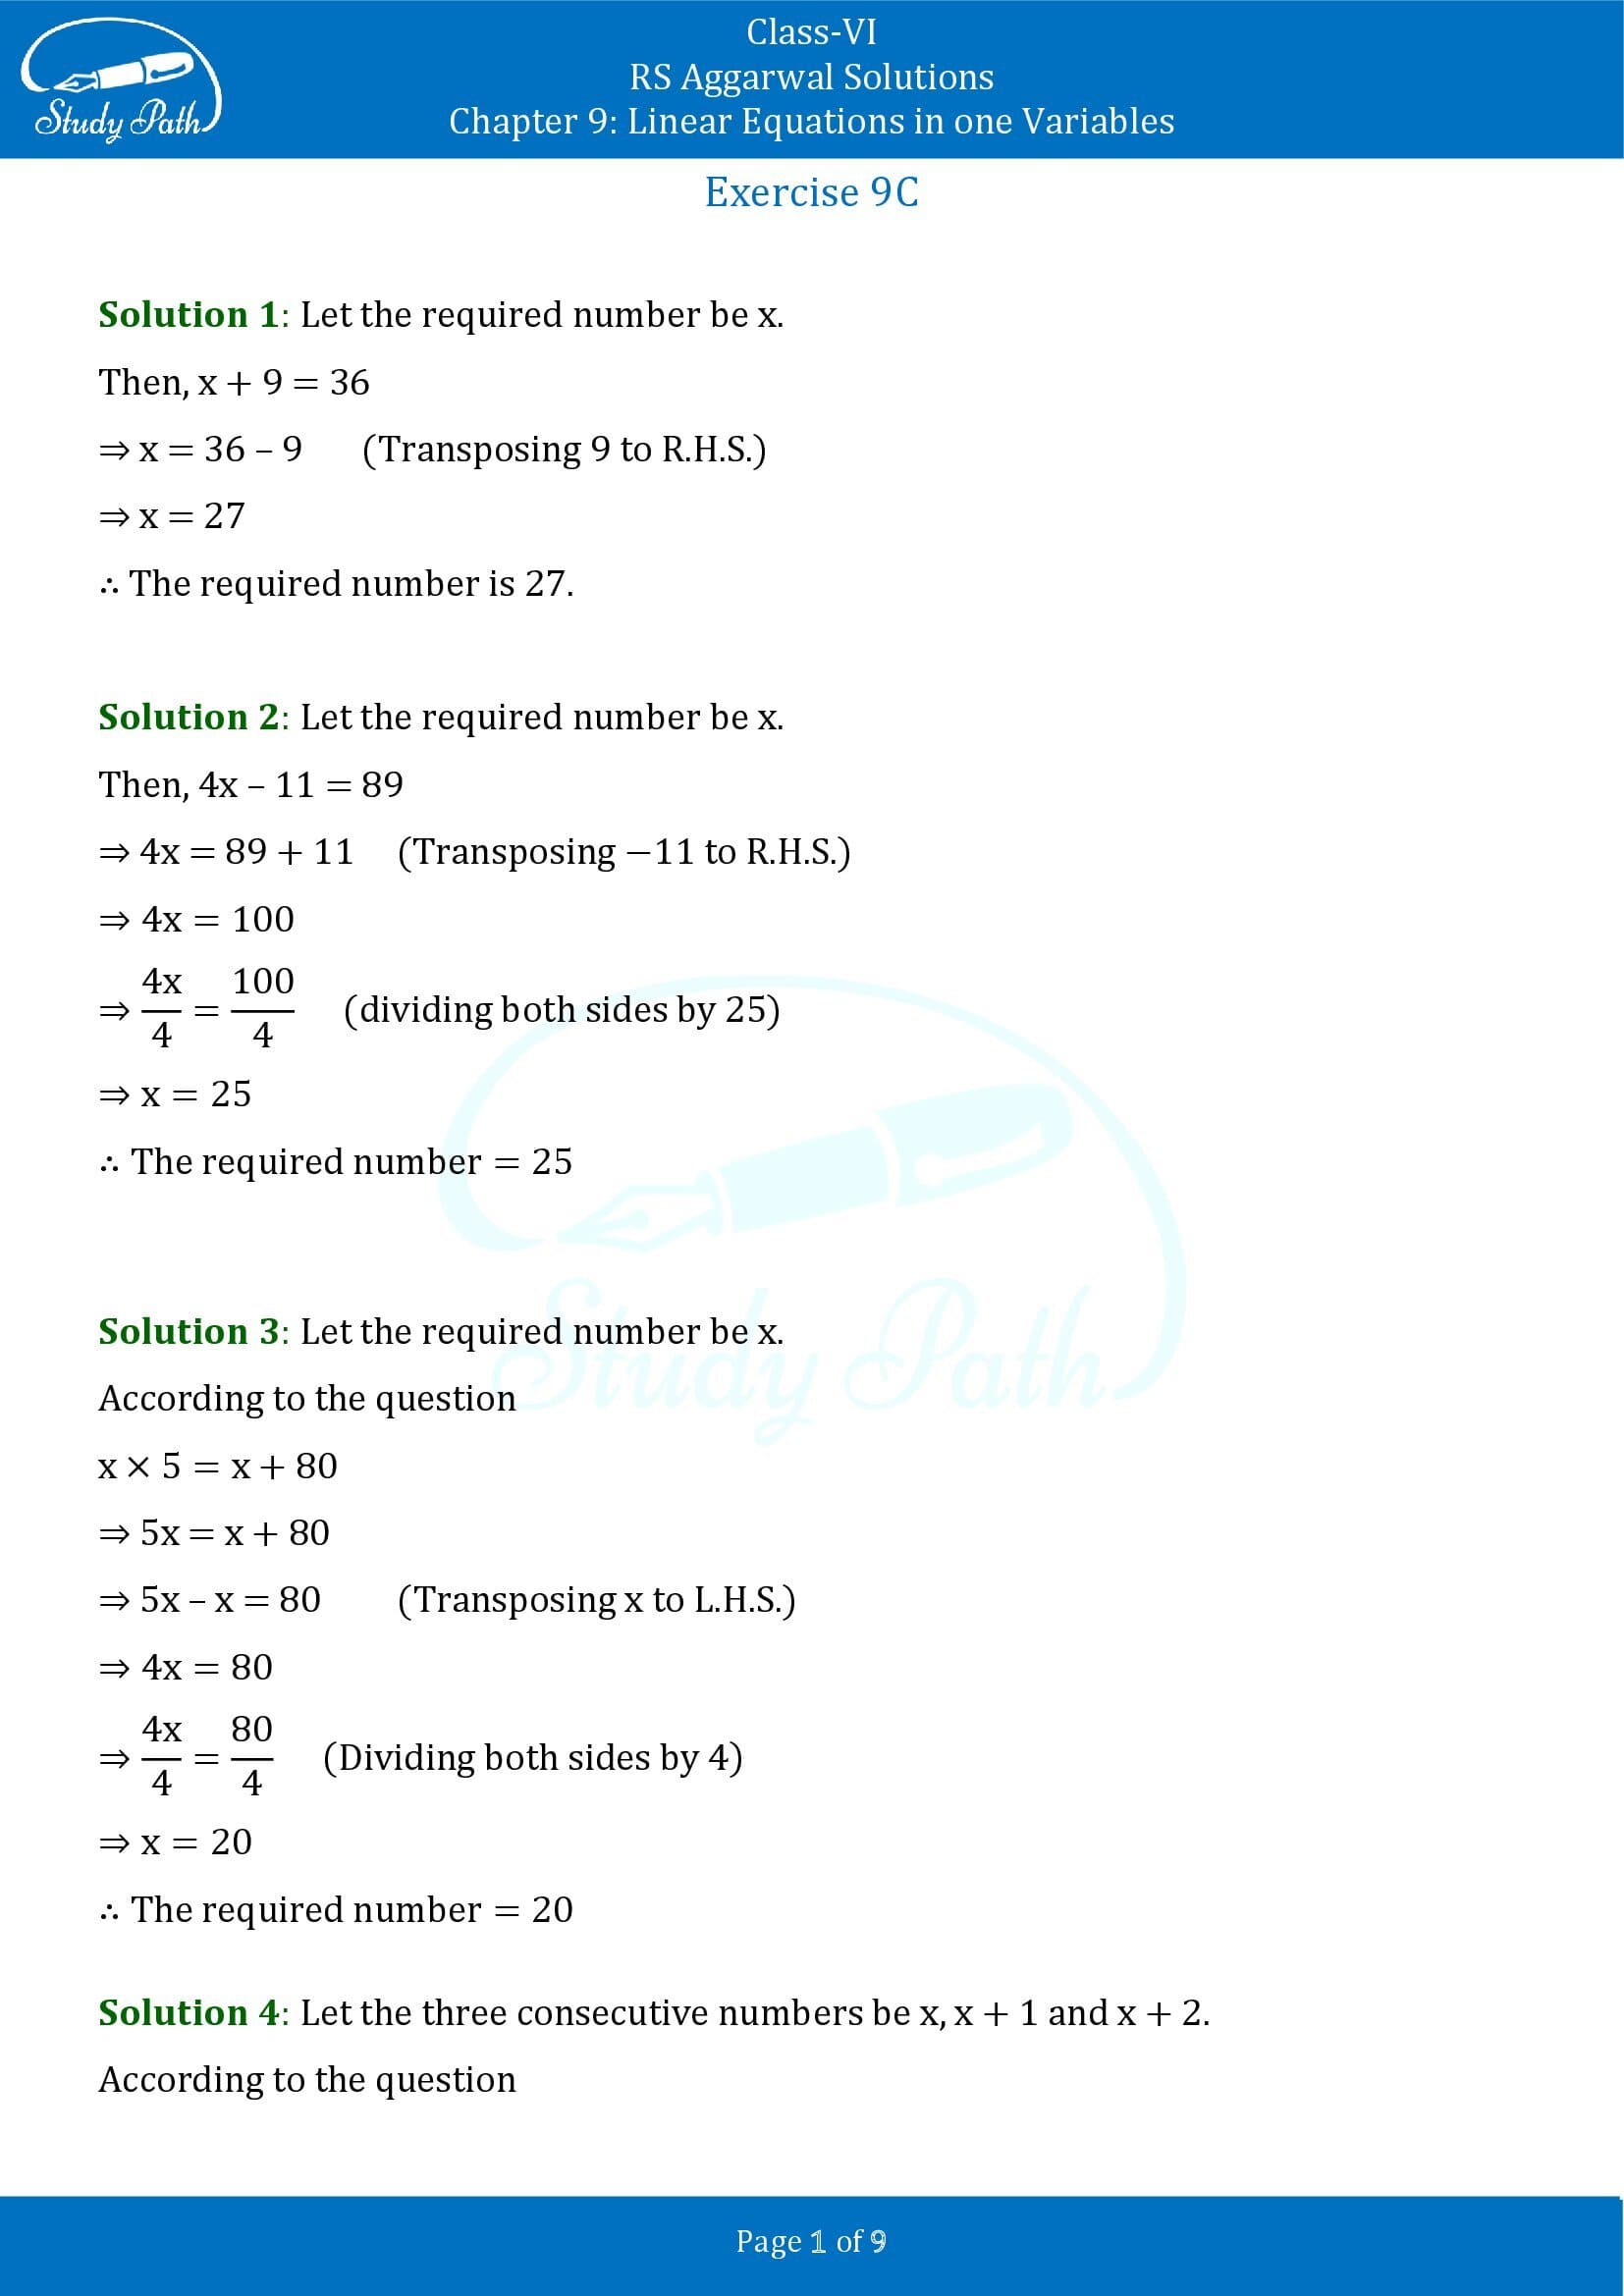 RS Aggarwal Solutions Class 6 Chapter 9 Linear Equations in One Variable Exercise 9C 00001